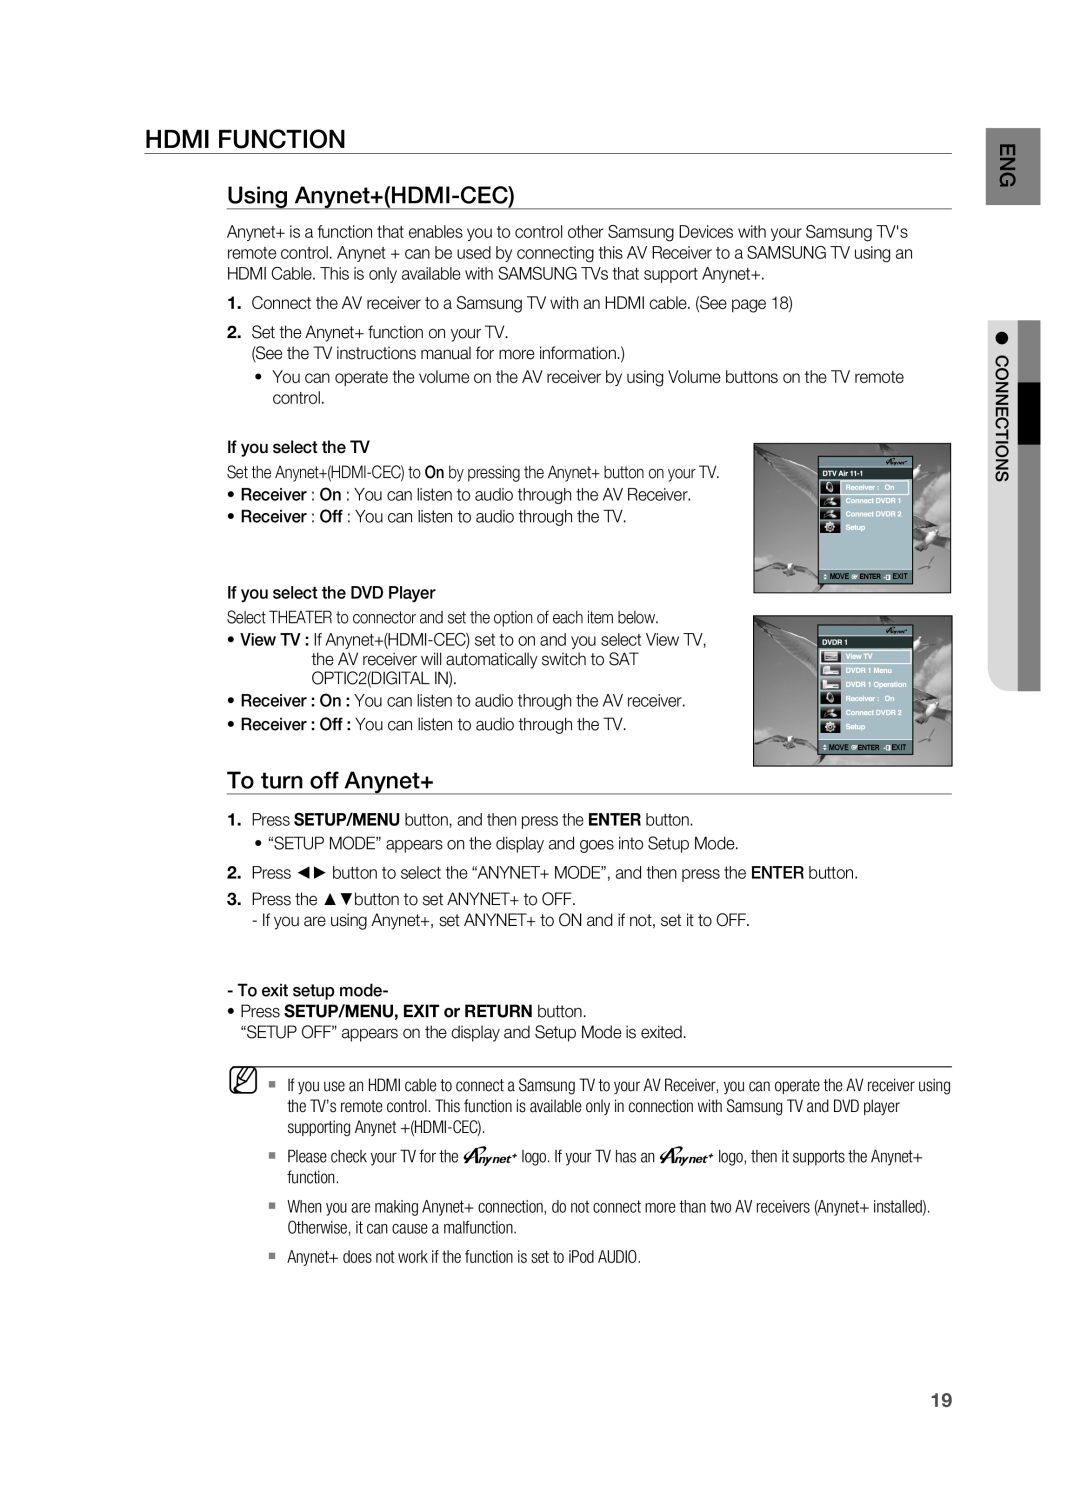 Samsung HT-AS730ST user manual Hdmi Function, Using Anynet+HDMI-CEC, To turn off Anynet+ 